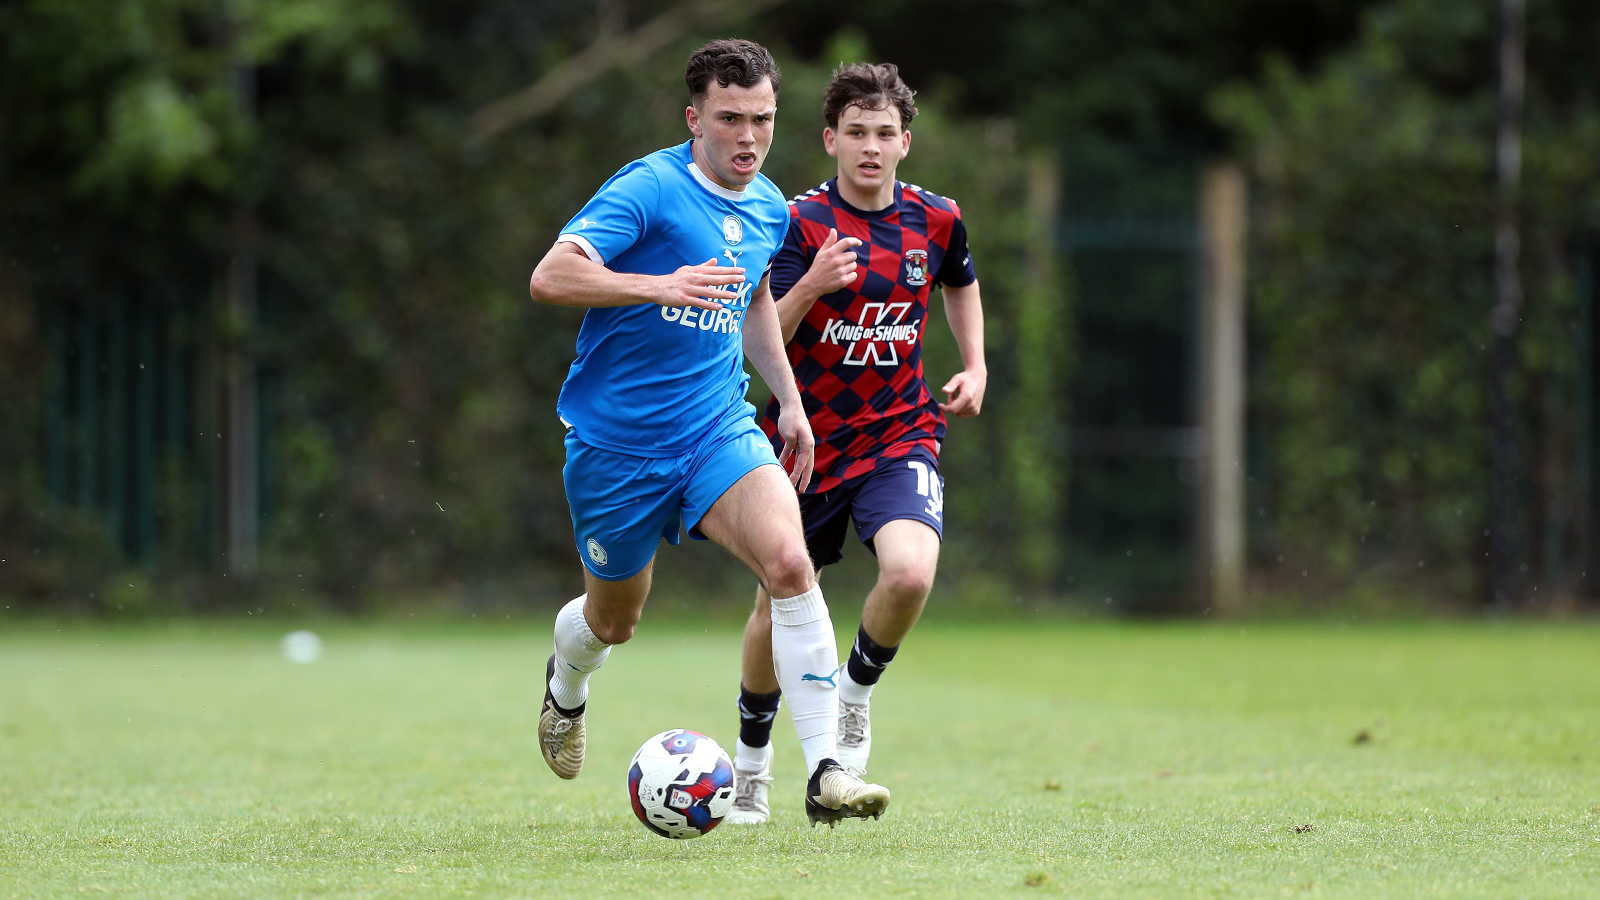 Charlie O'Connell in action for the U21s against Coventry City U21s